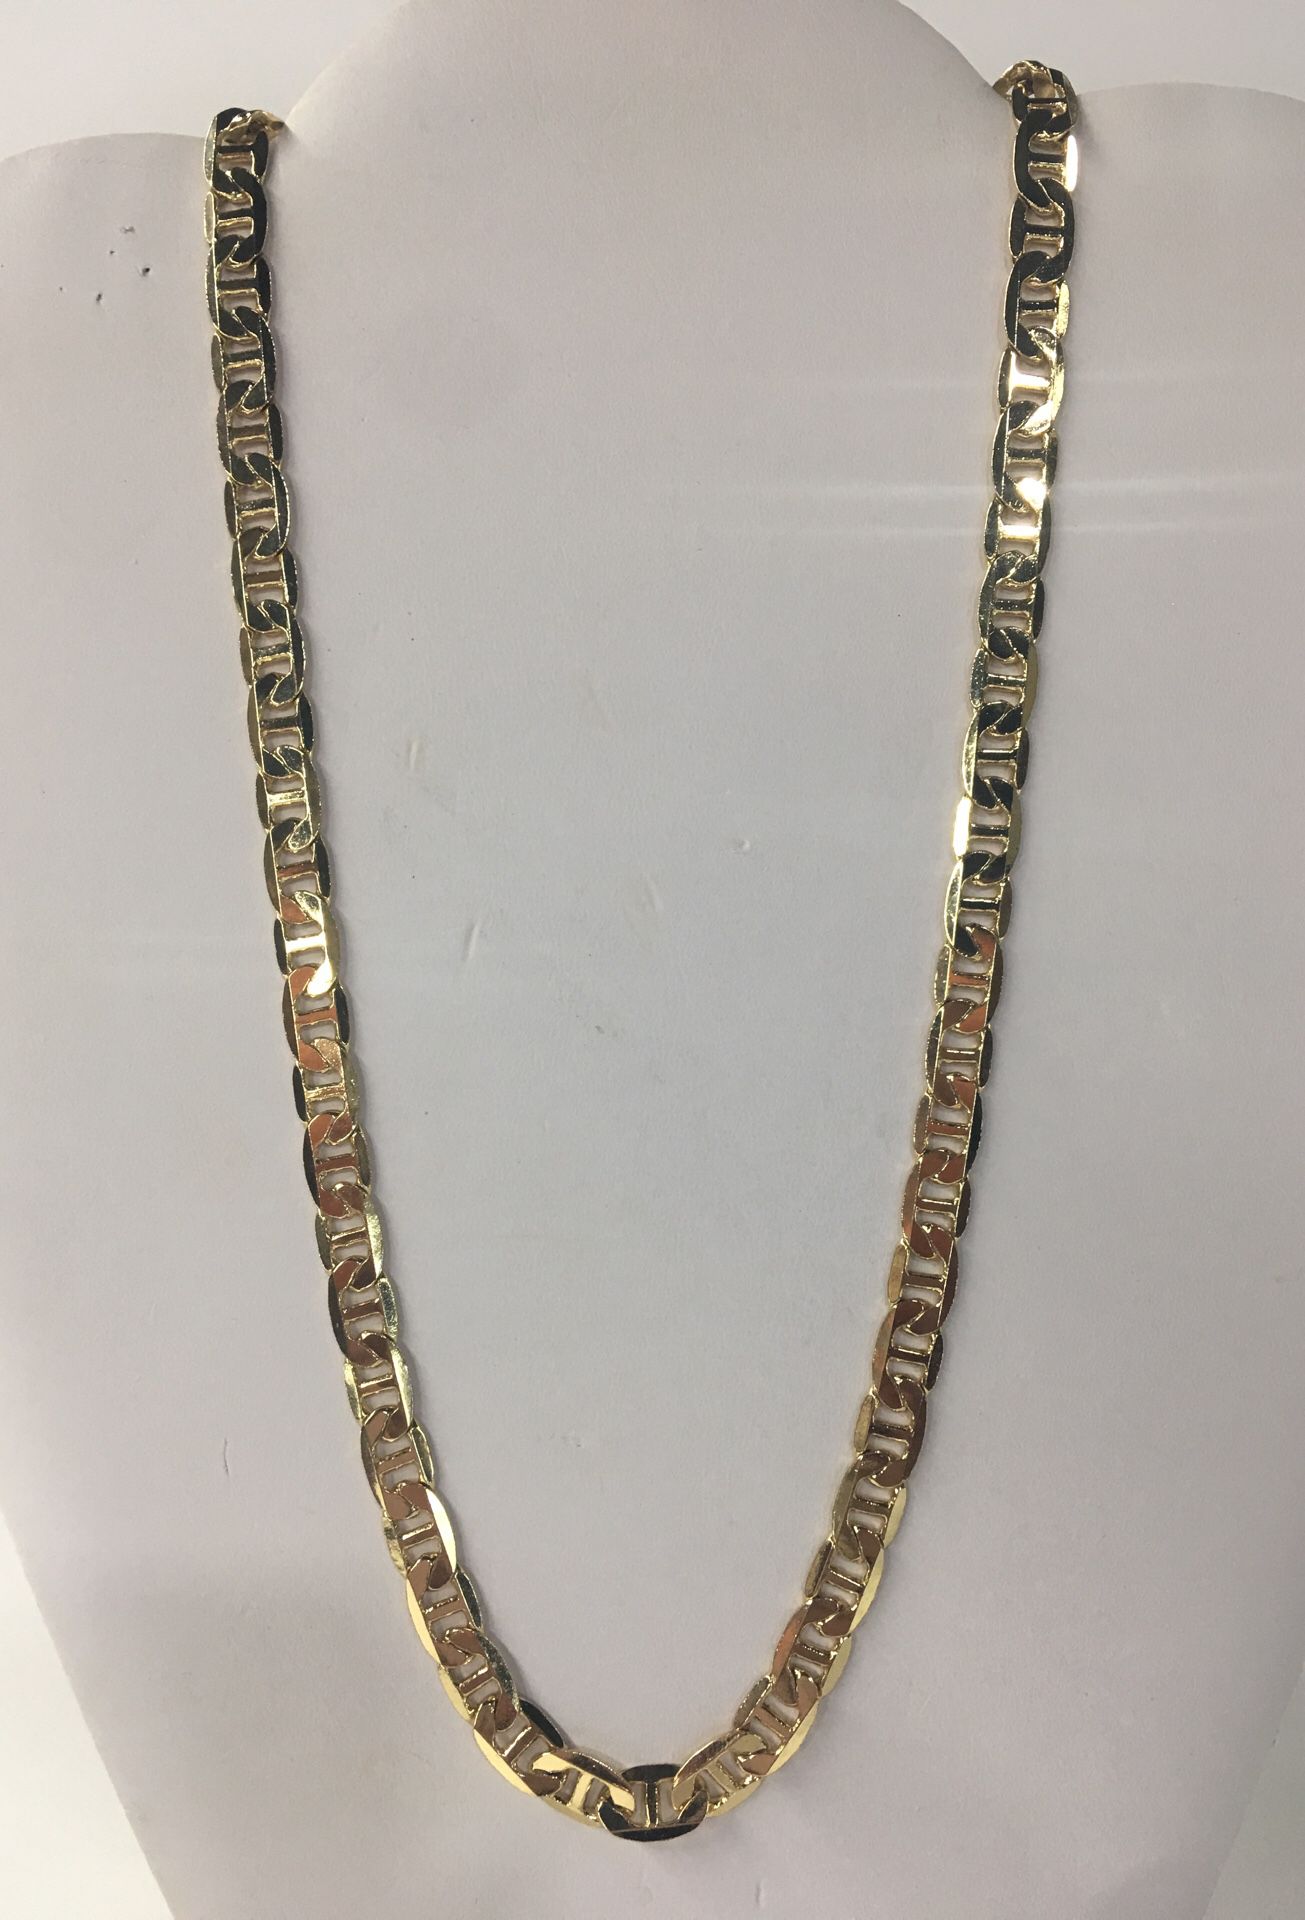 Gucci Link Necklace Gold filled men’s link chain